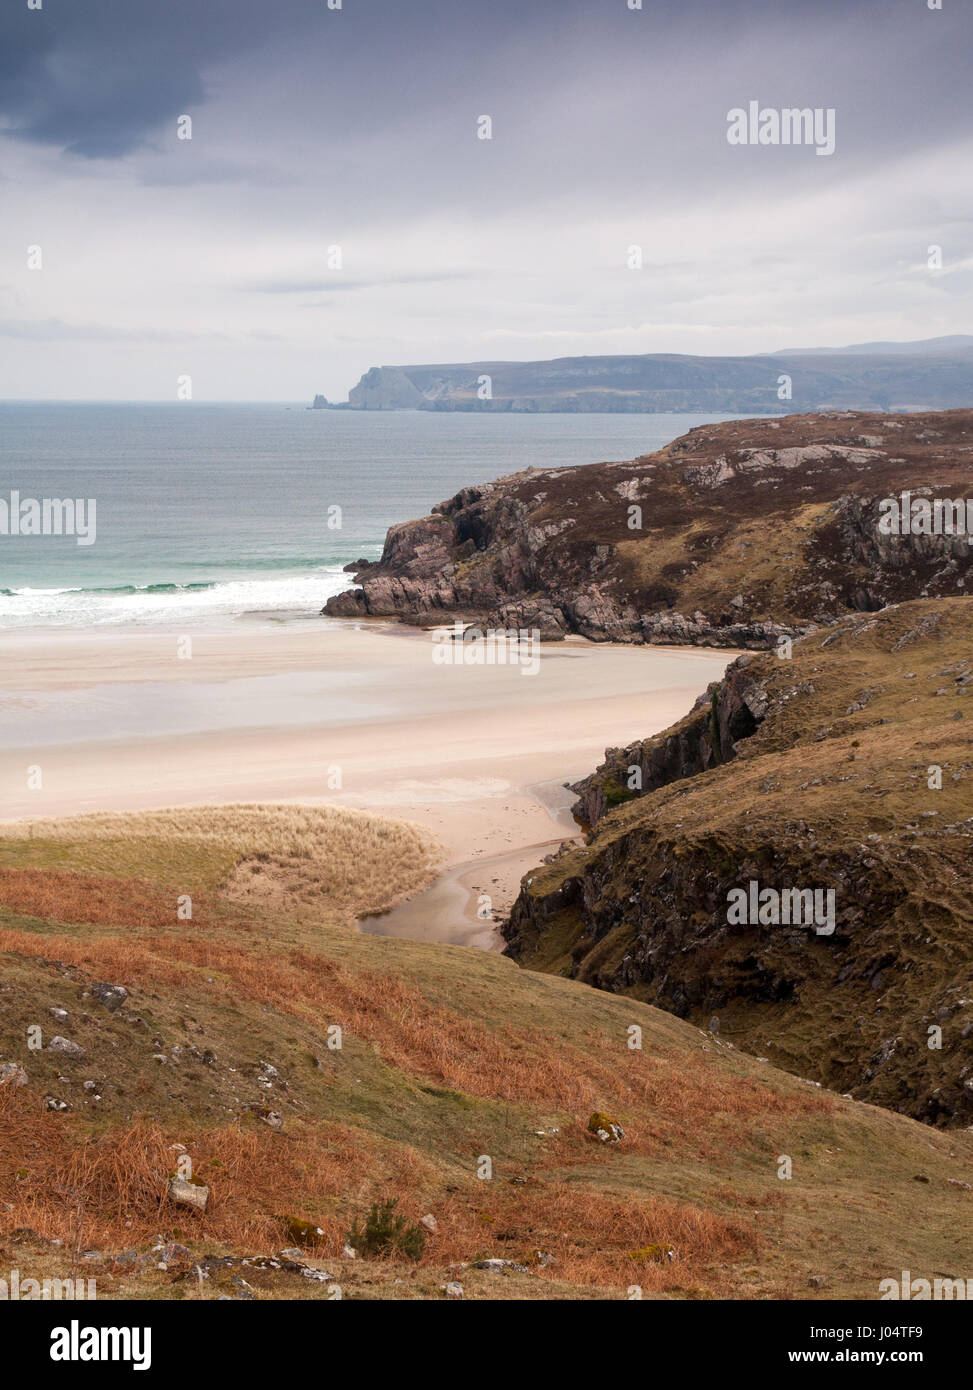 Ceannabeinne, 'the end of the mountains', traditionally known as Traigh Allt Chailgeag – the beach of the burn of bereavement and death. The sandy bea Stock Photo